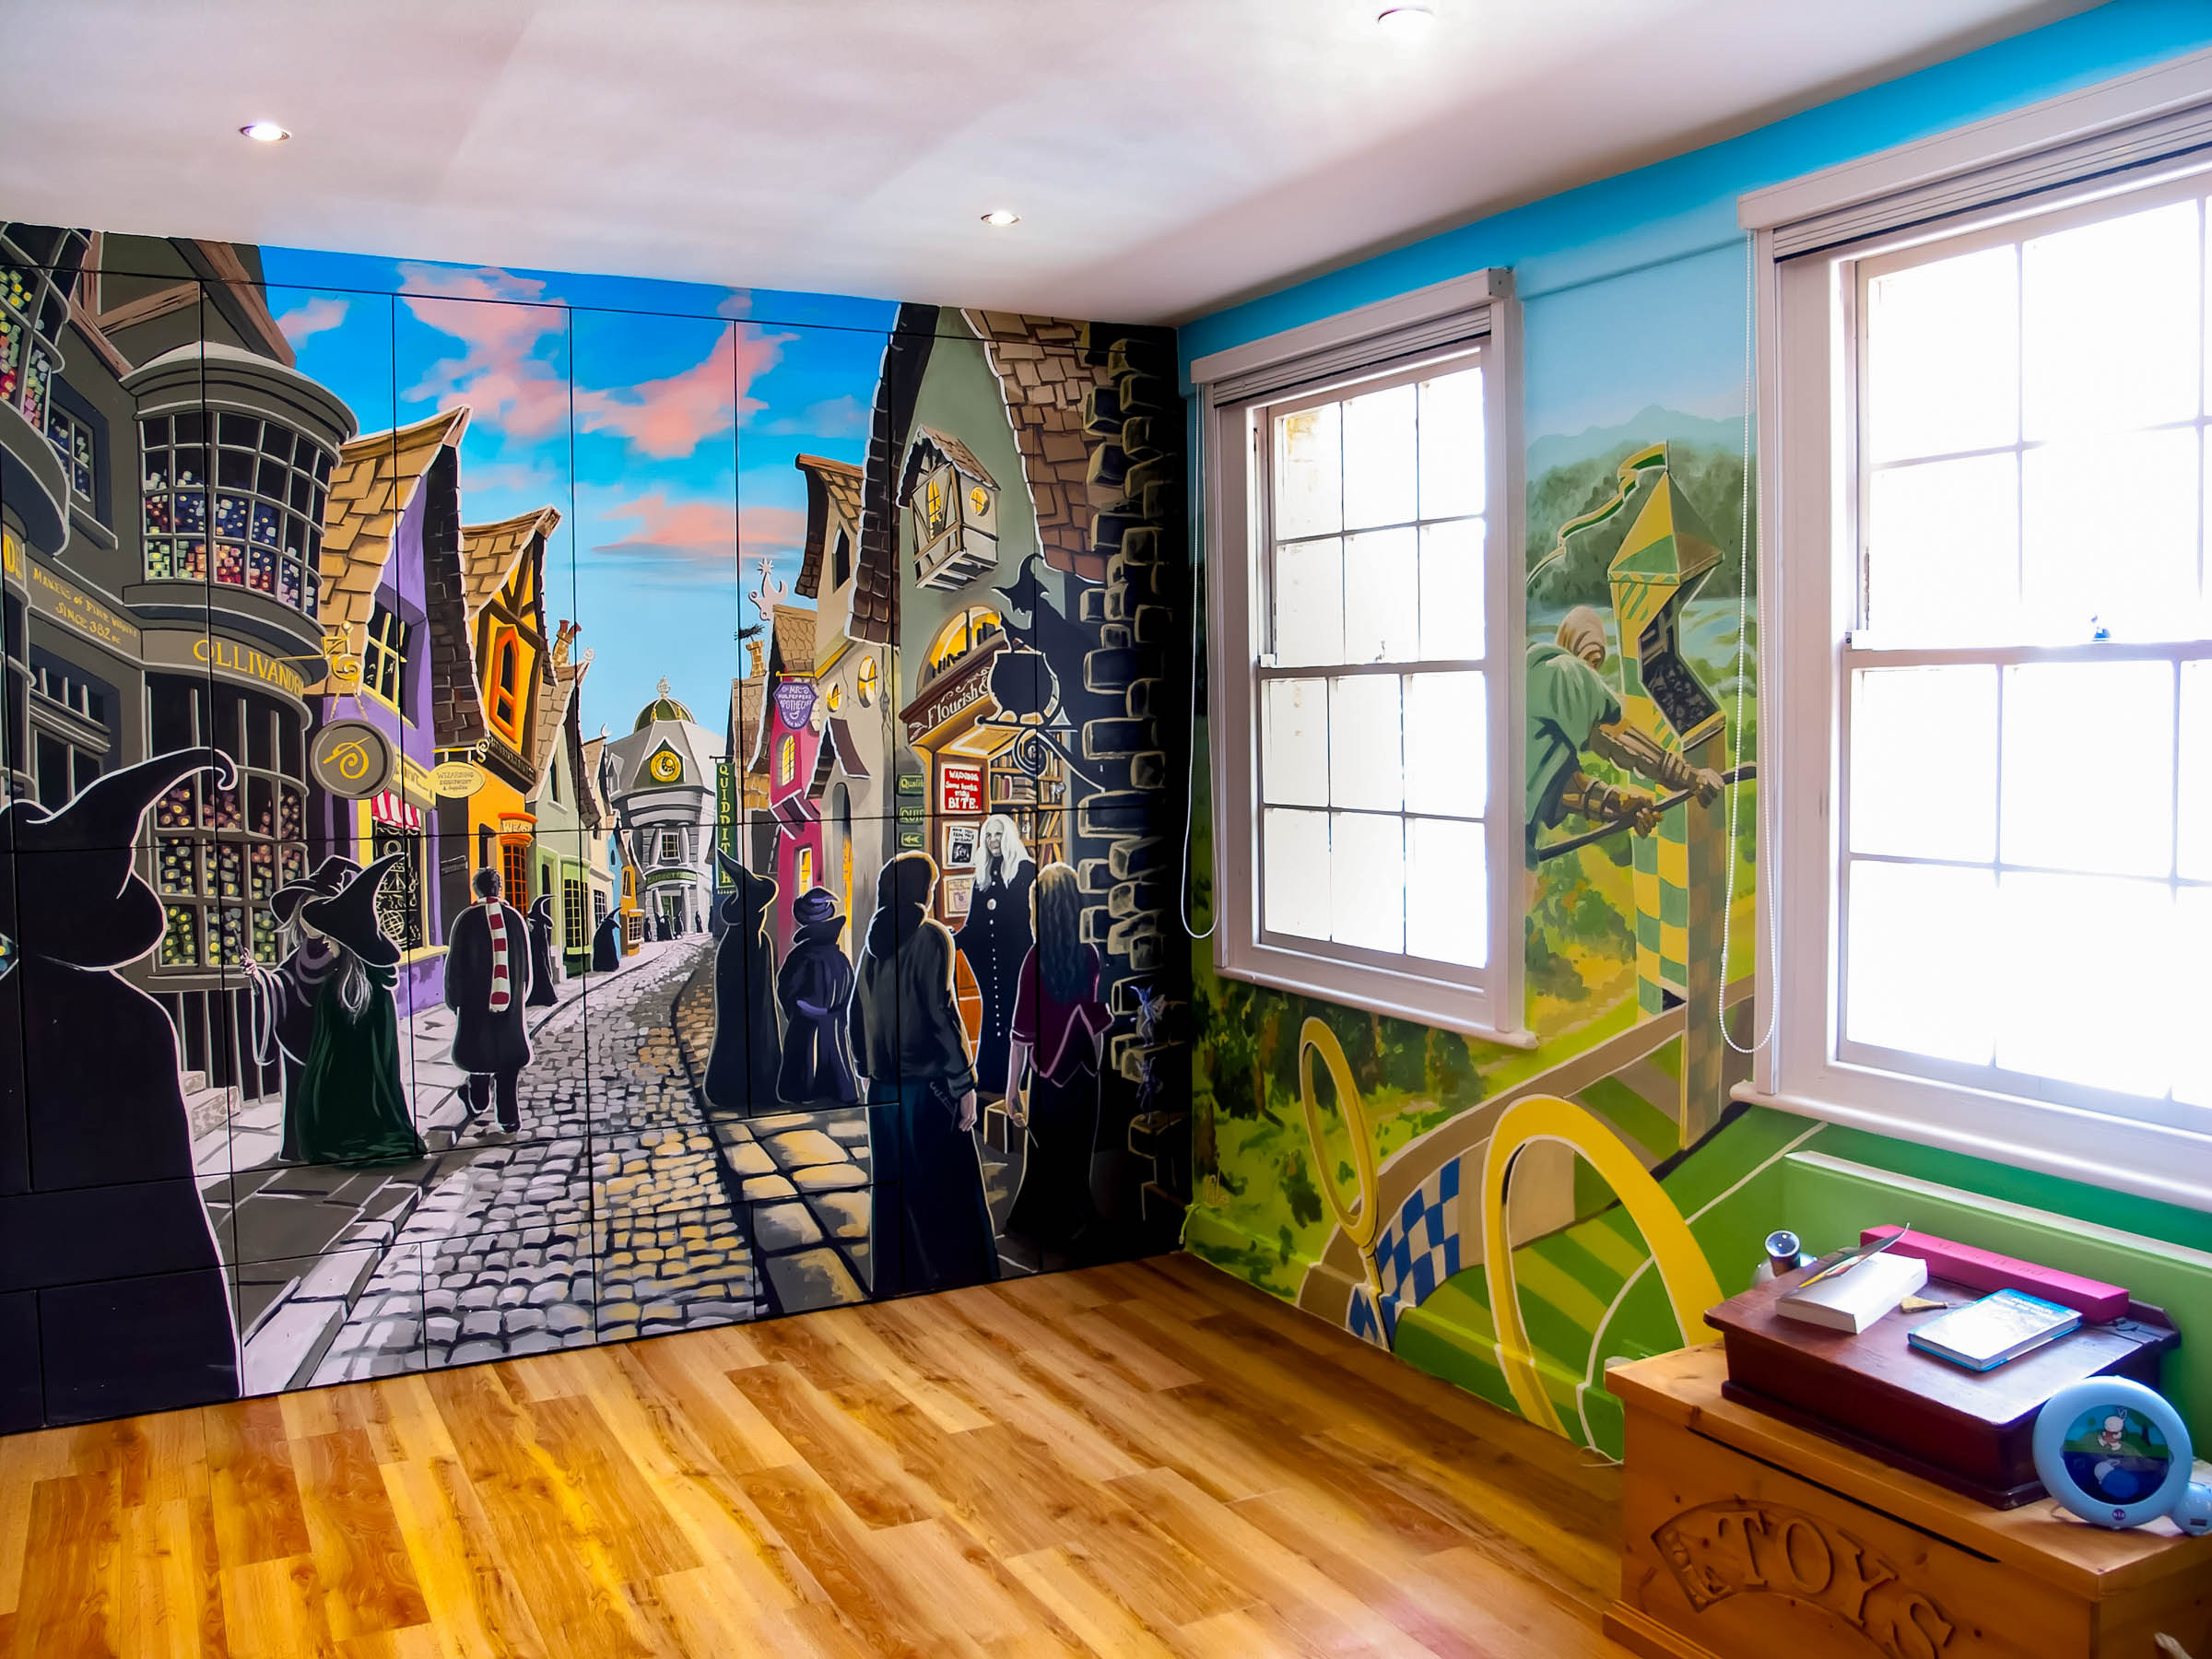 wall mural theme - Diagon Alley meets quidditch in boys' bedroom